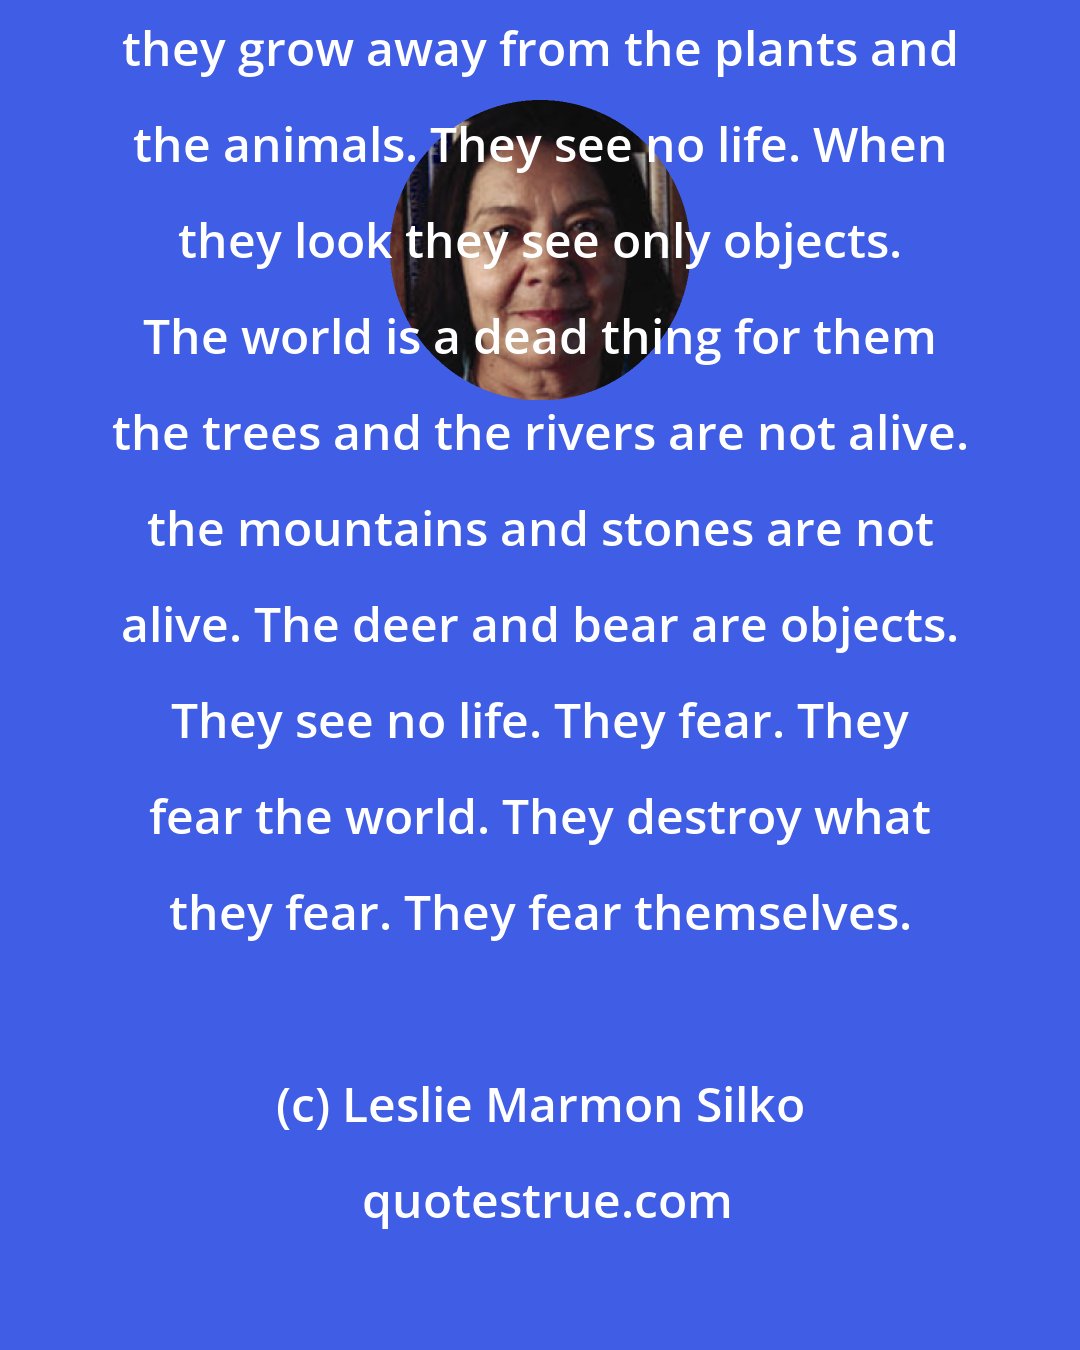 Leslie Marmon Silko: Then they grow away from the earth then they grow away from the sun then they grow away from the plants and the animals. They see no life. When they look they see only objects. The world is a dead thing for them the trees and the rivers are not alive. the mountains and stones are not alive. The deer and bear are objects. They see no life. They fear. They fear the world. They destroy what they fear. They fear themselves.